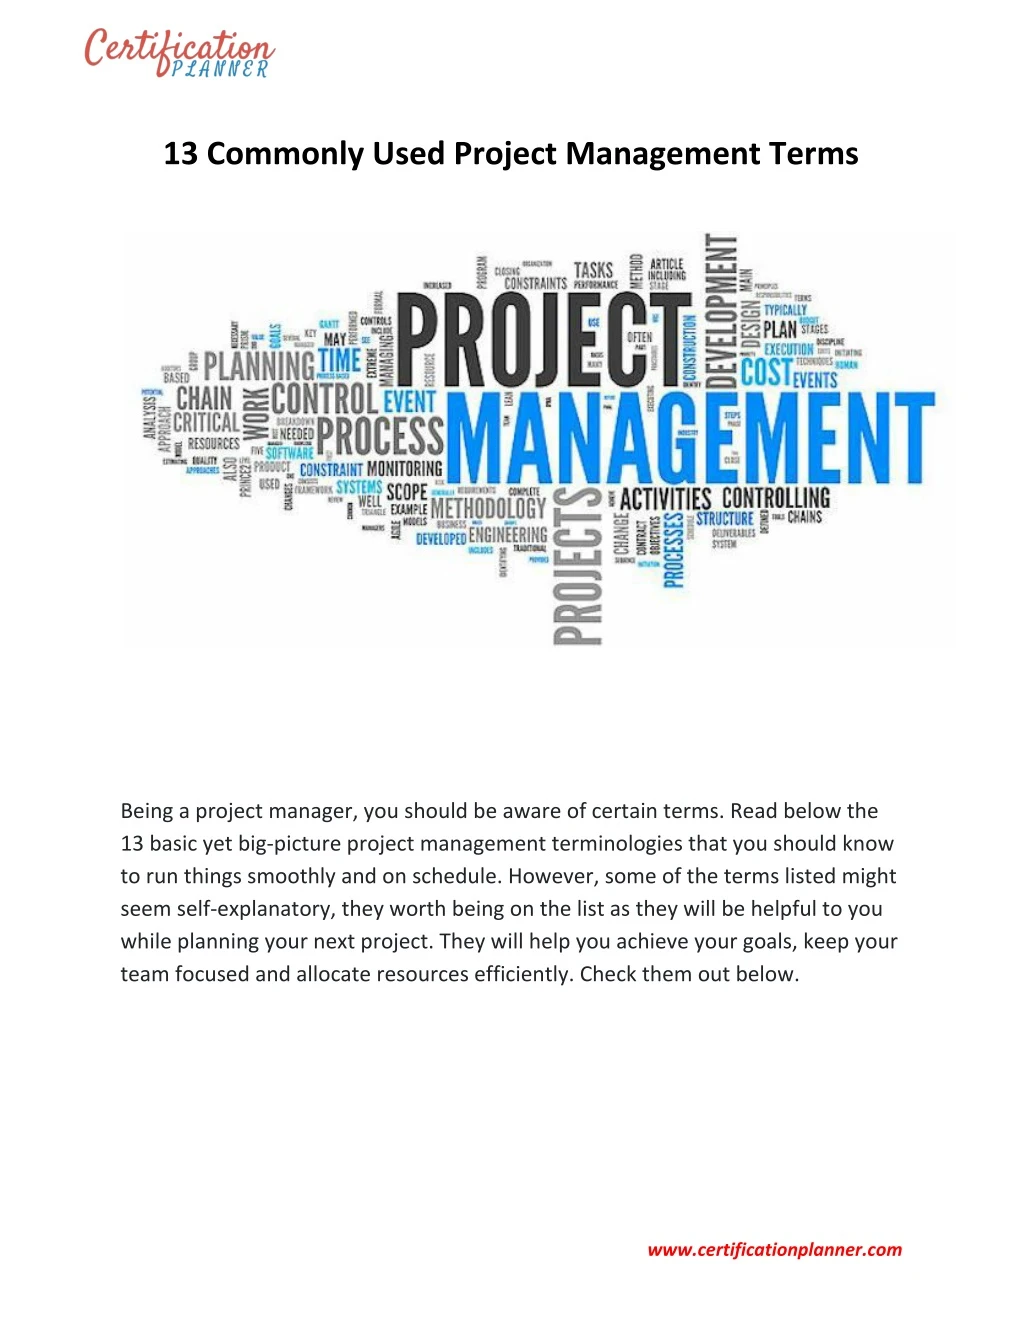 13 commonly used project management terms